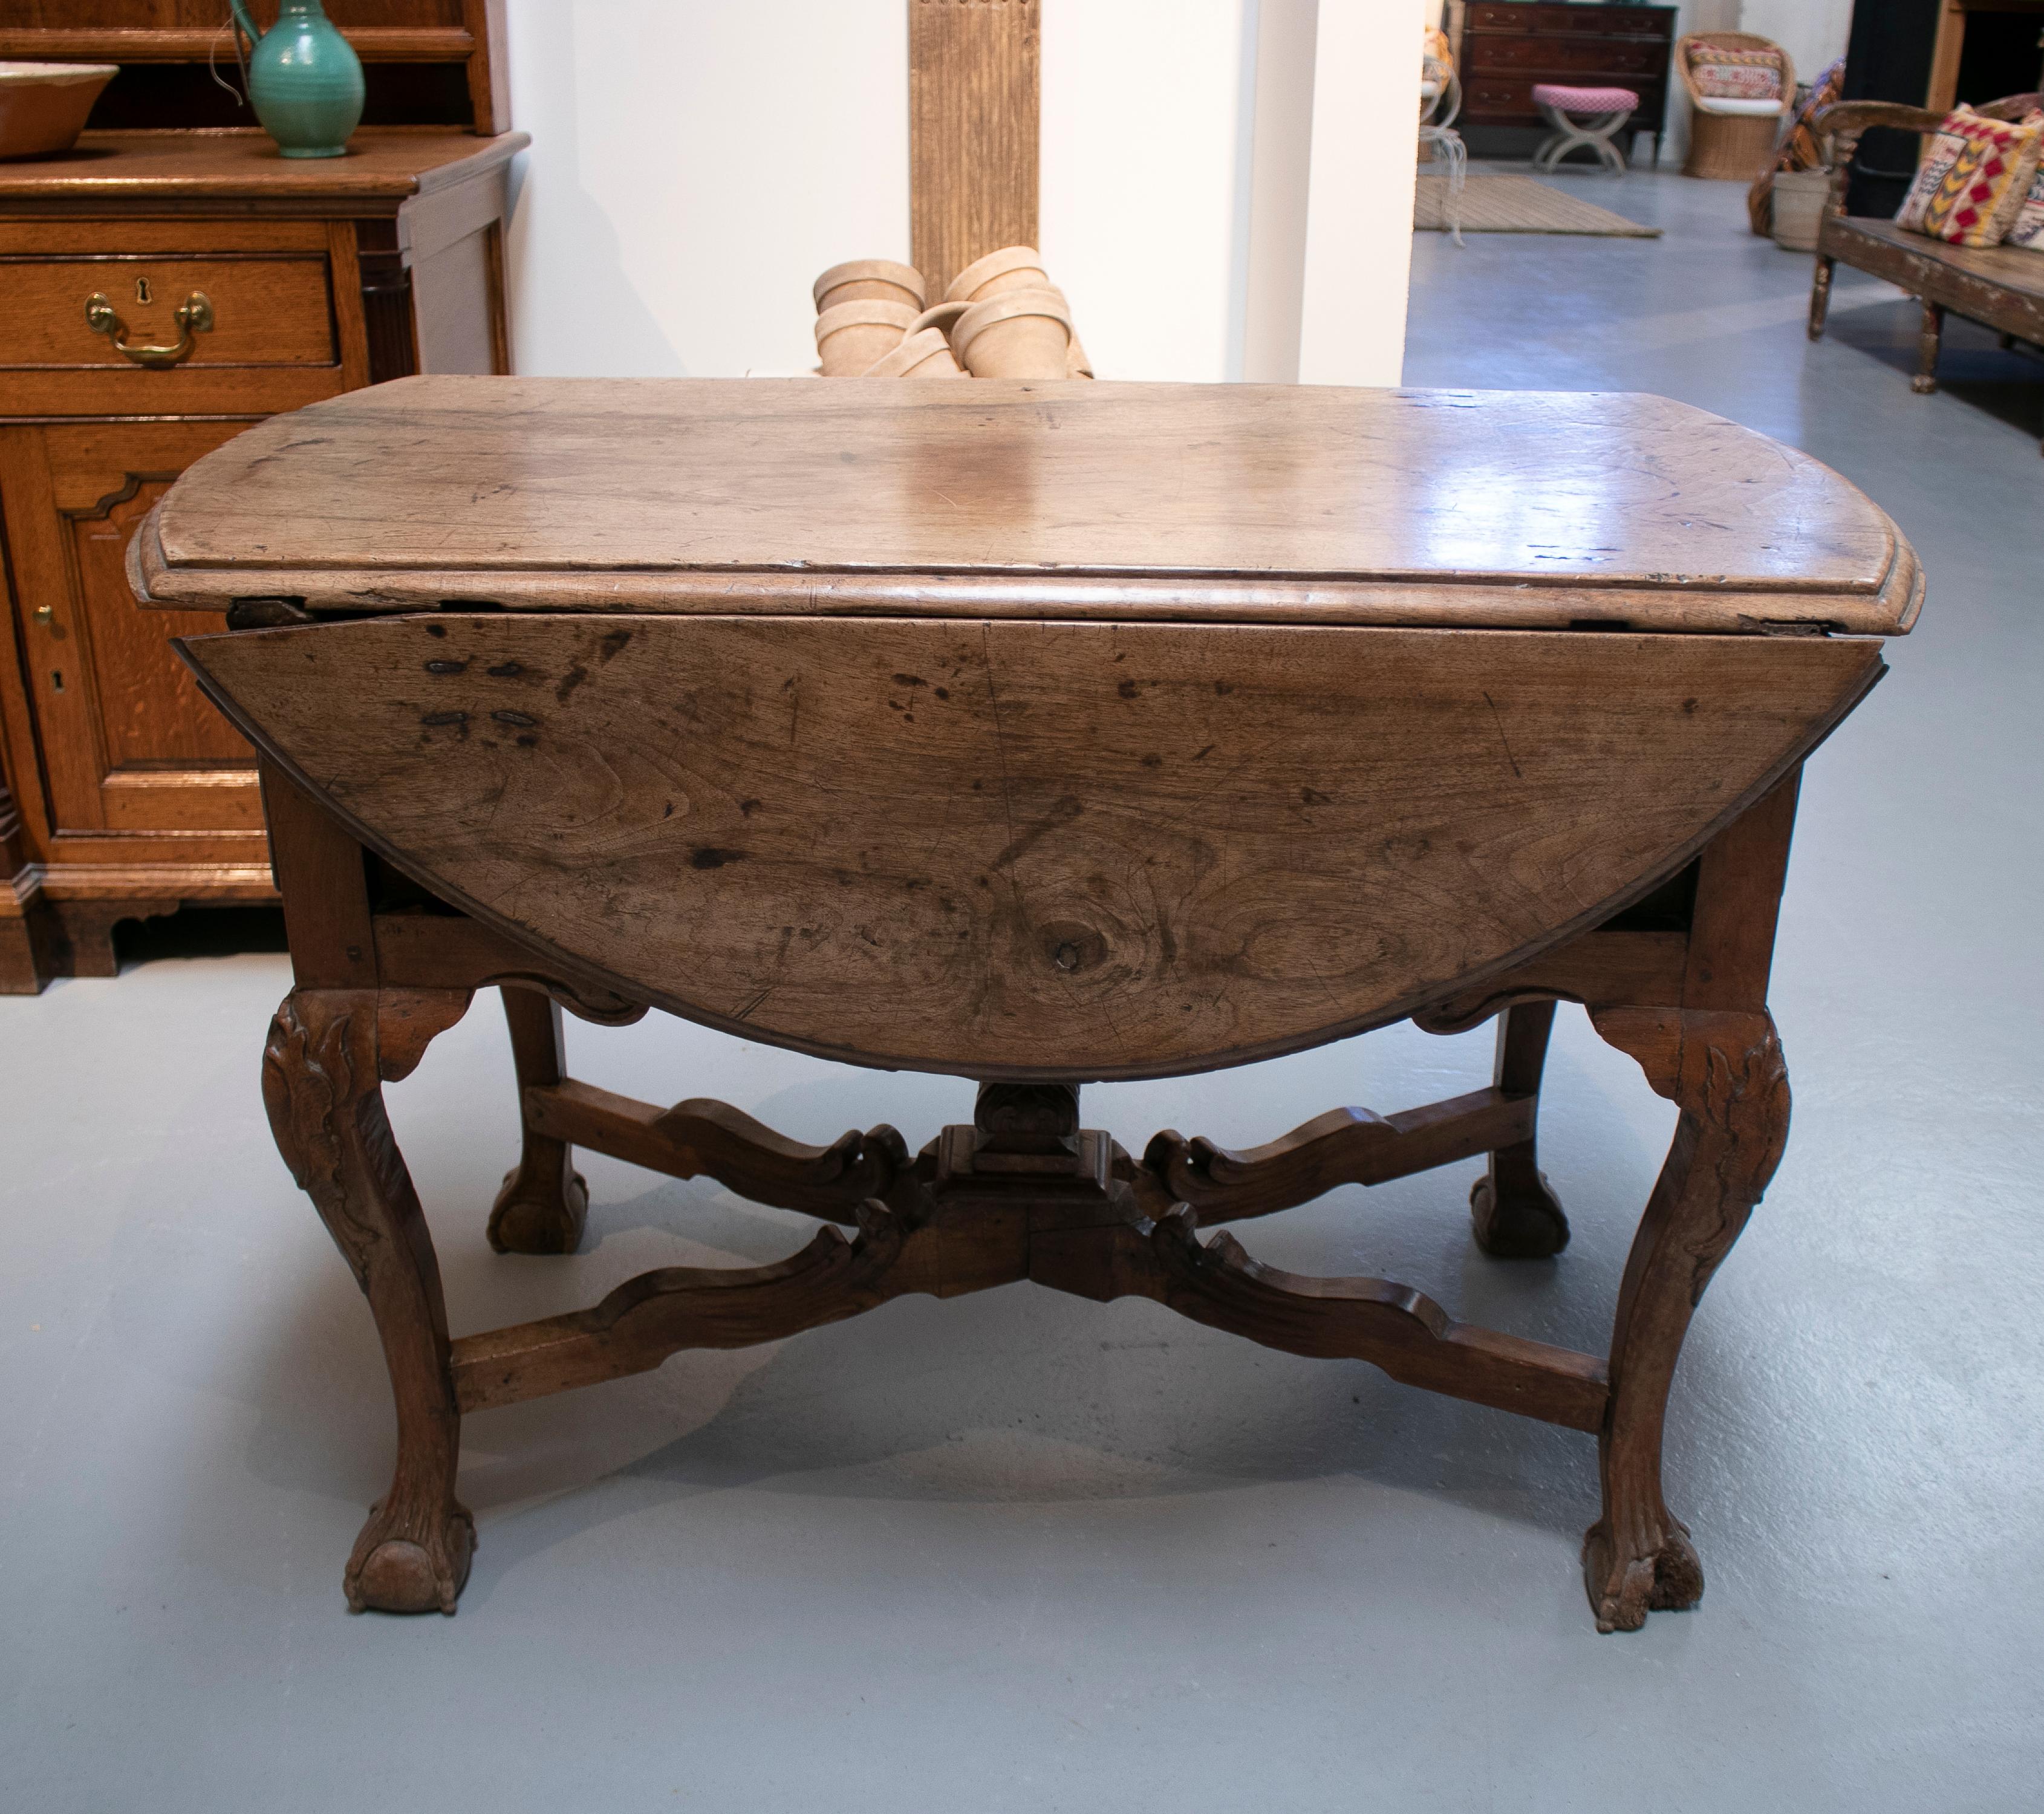 Antique 17th century Spanish walnut winged table with claw feet.